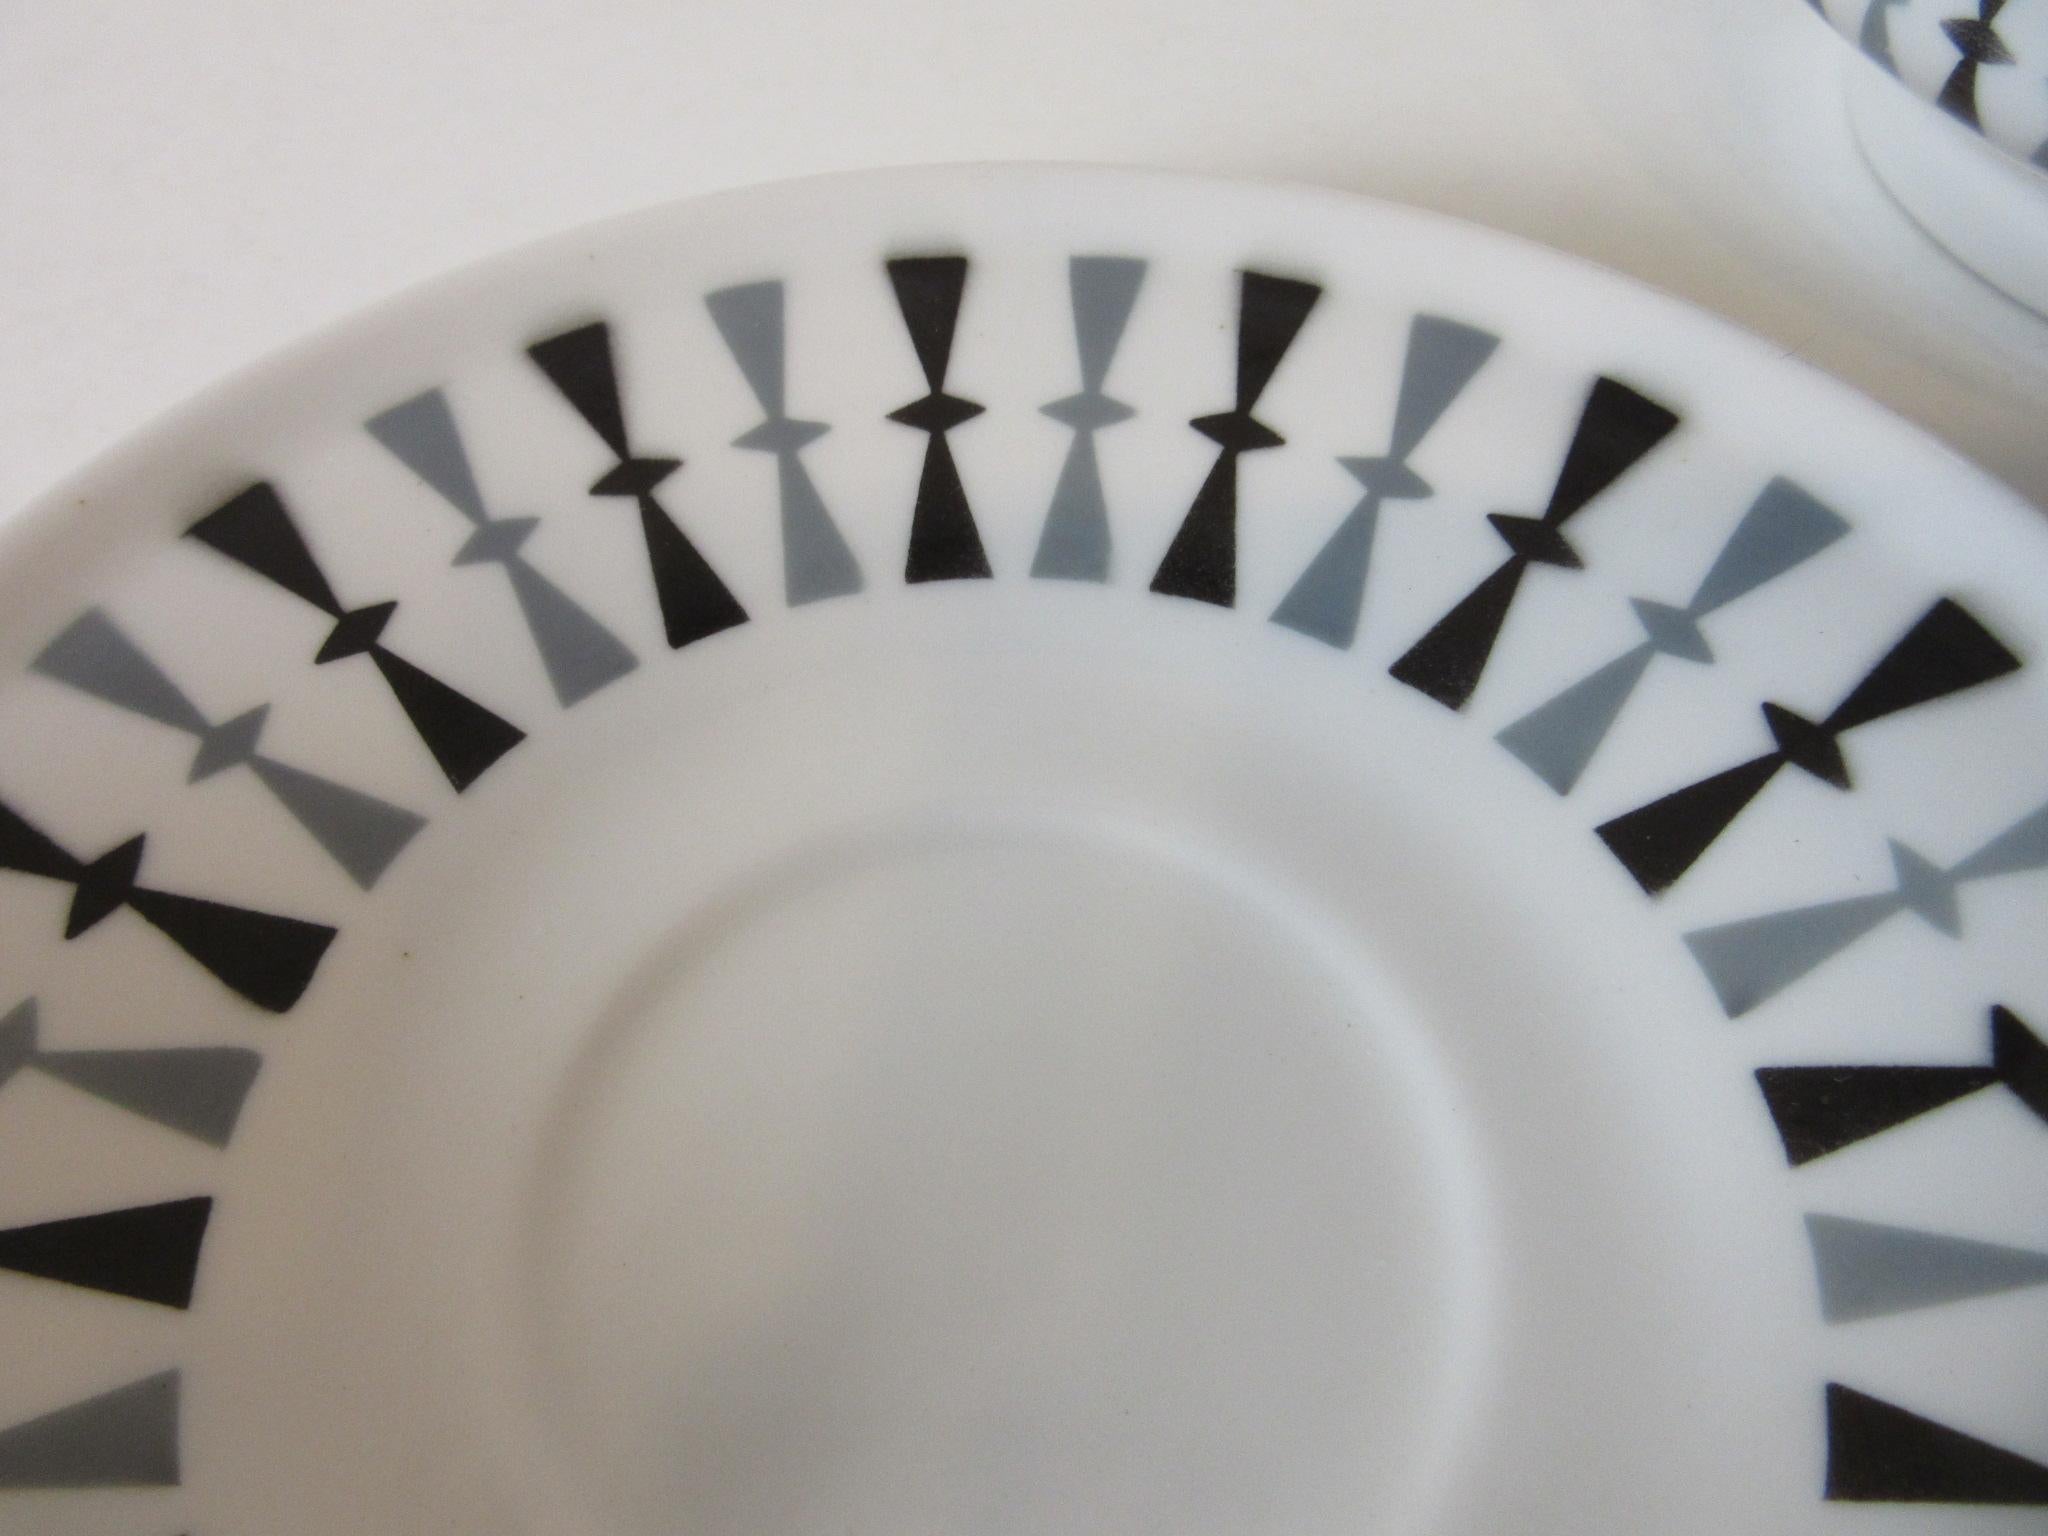 A very fine 72 pc. Paul McCobb china set making 12 ( six) piece place settings with great graphics for the Jackson China company from the Contempri collection. This pattern and design was in limited production from 1959 to 1960 in a restaurant style